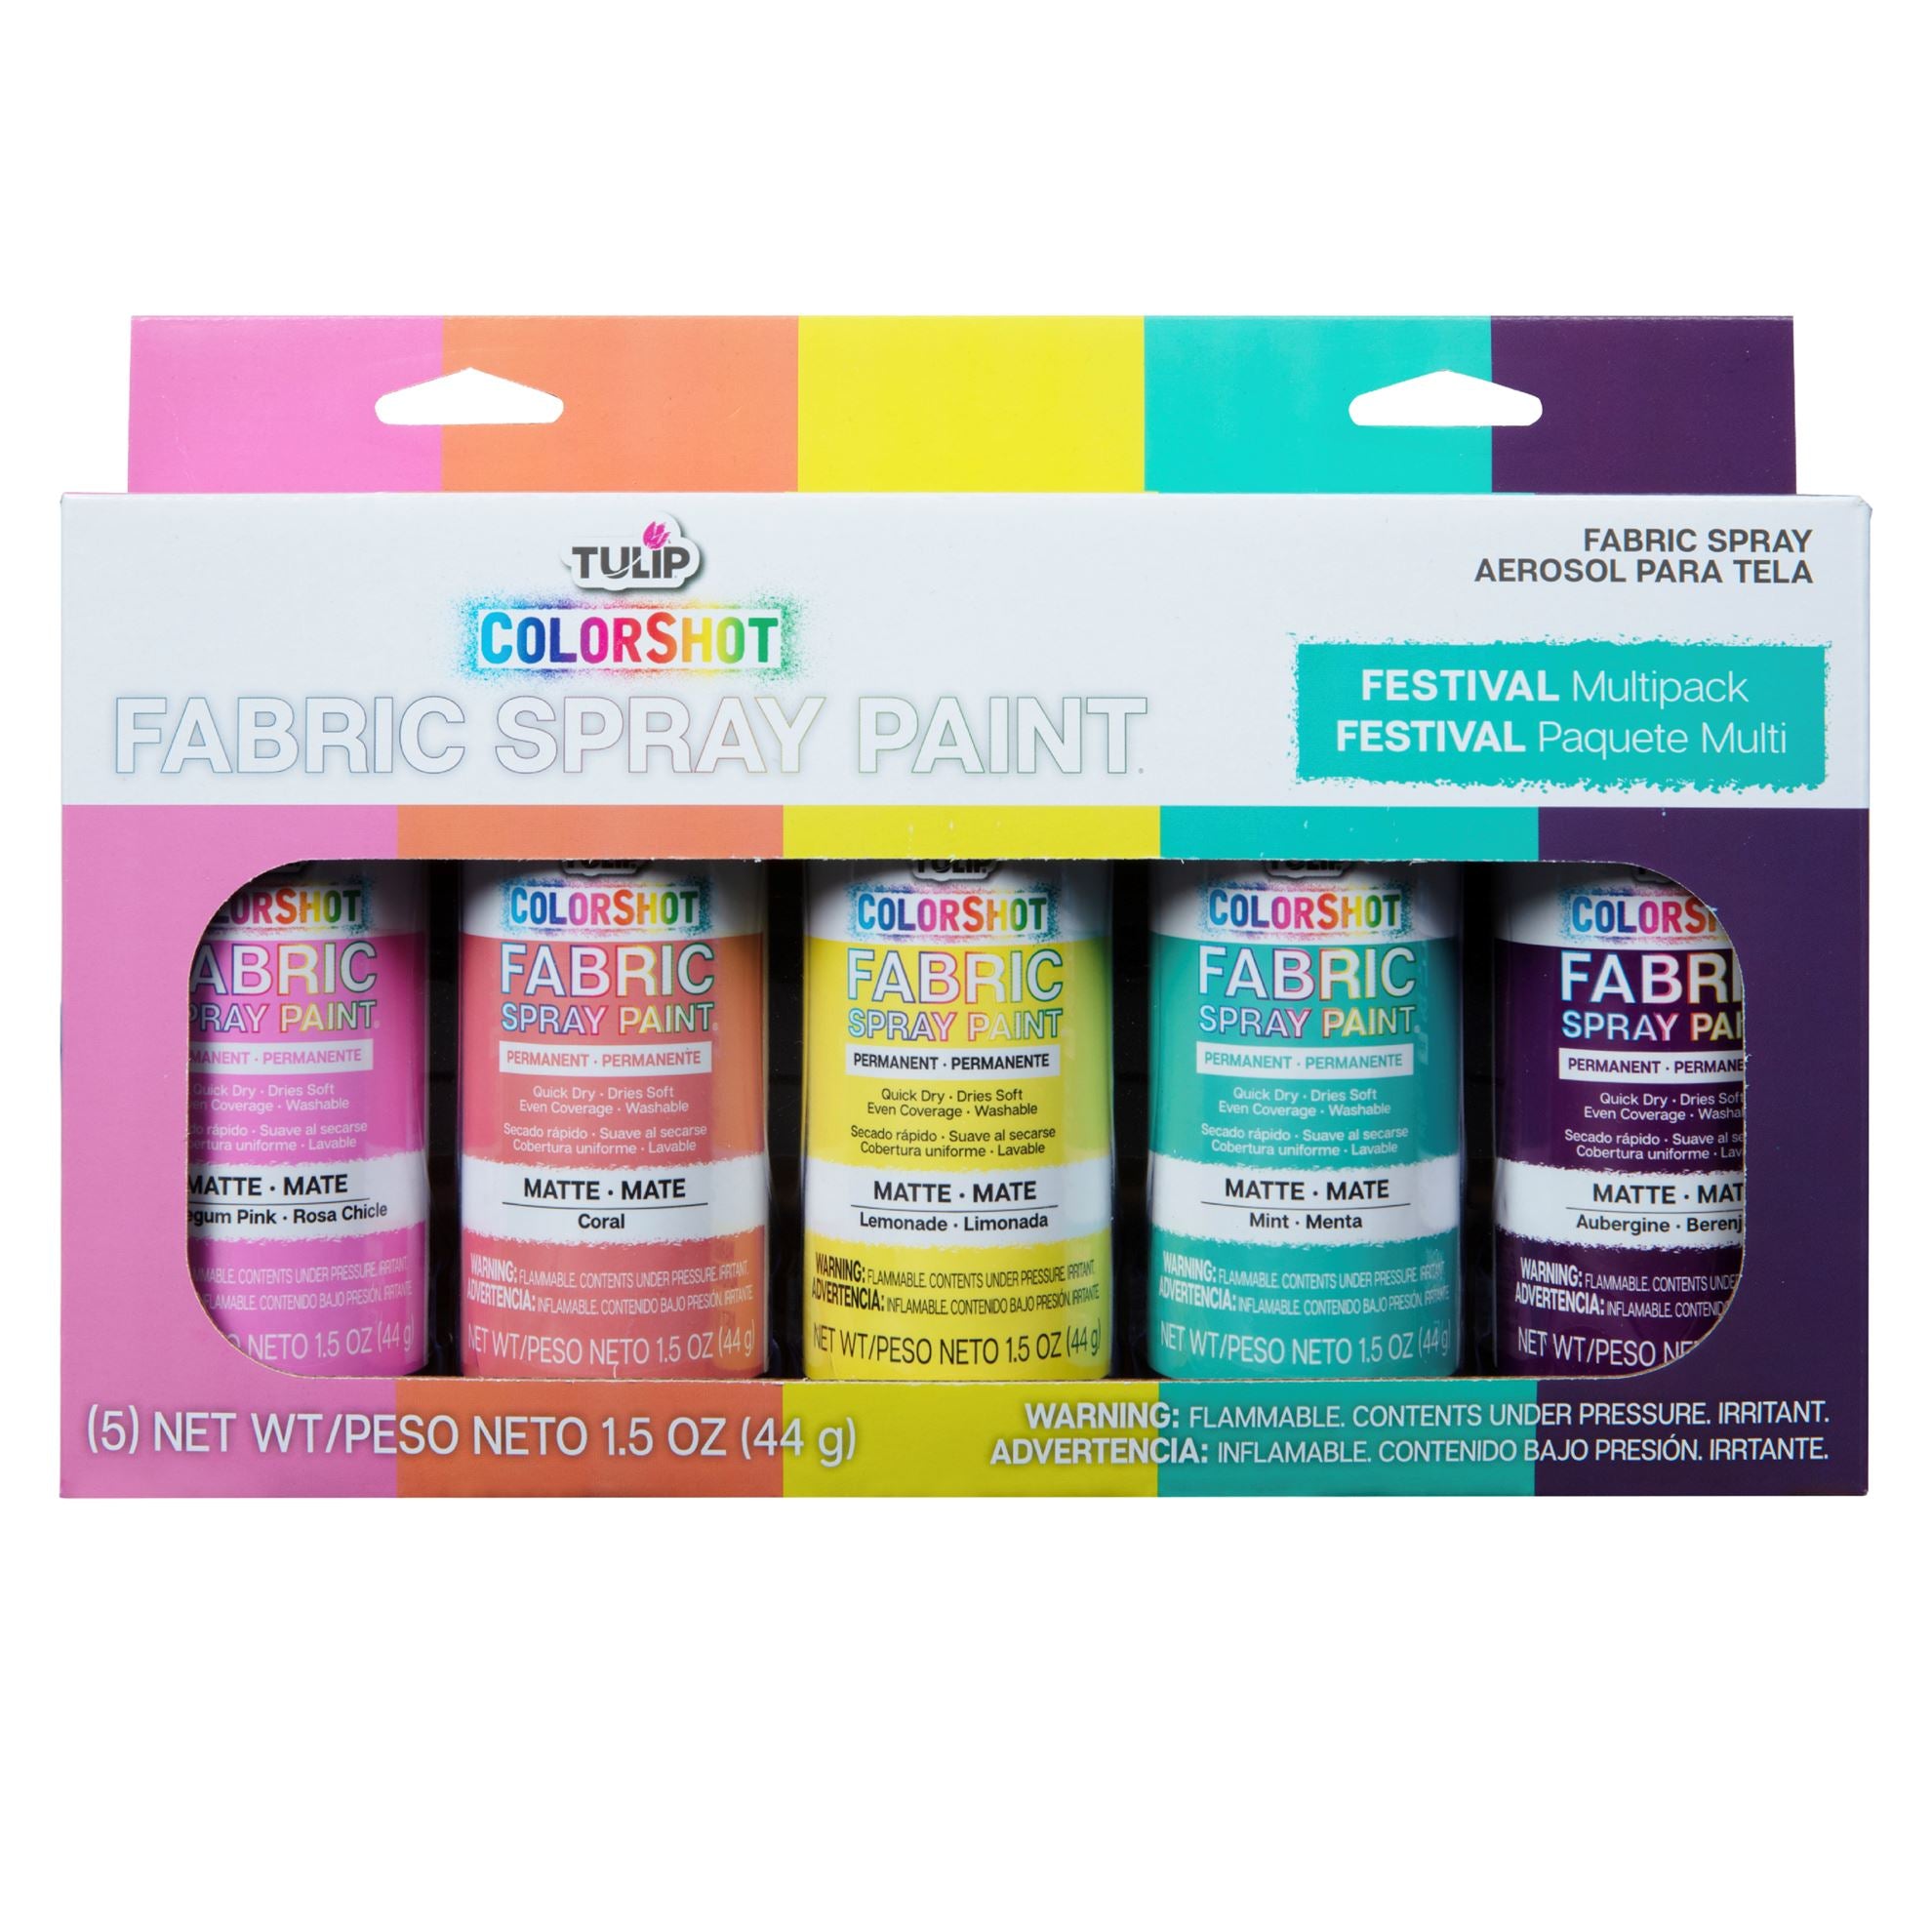 Tulip COLORSHOT Permanent Spray Paint for Fabric, Quick Dry, Dries Soft,  Colorful, Rainbow